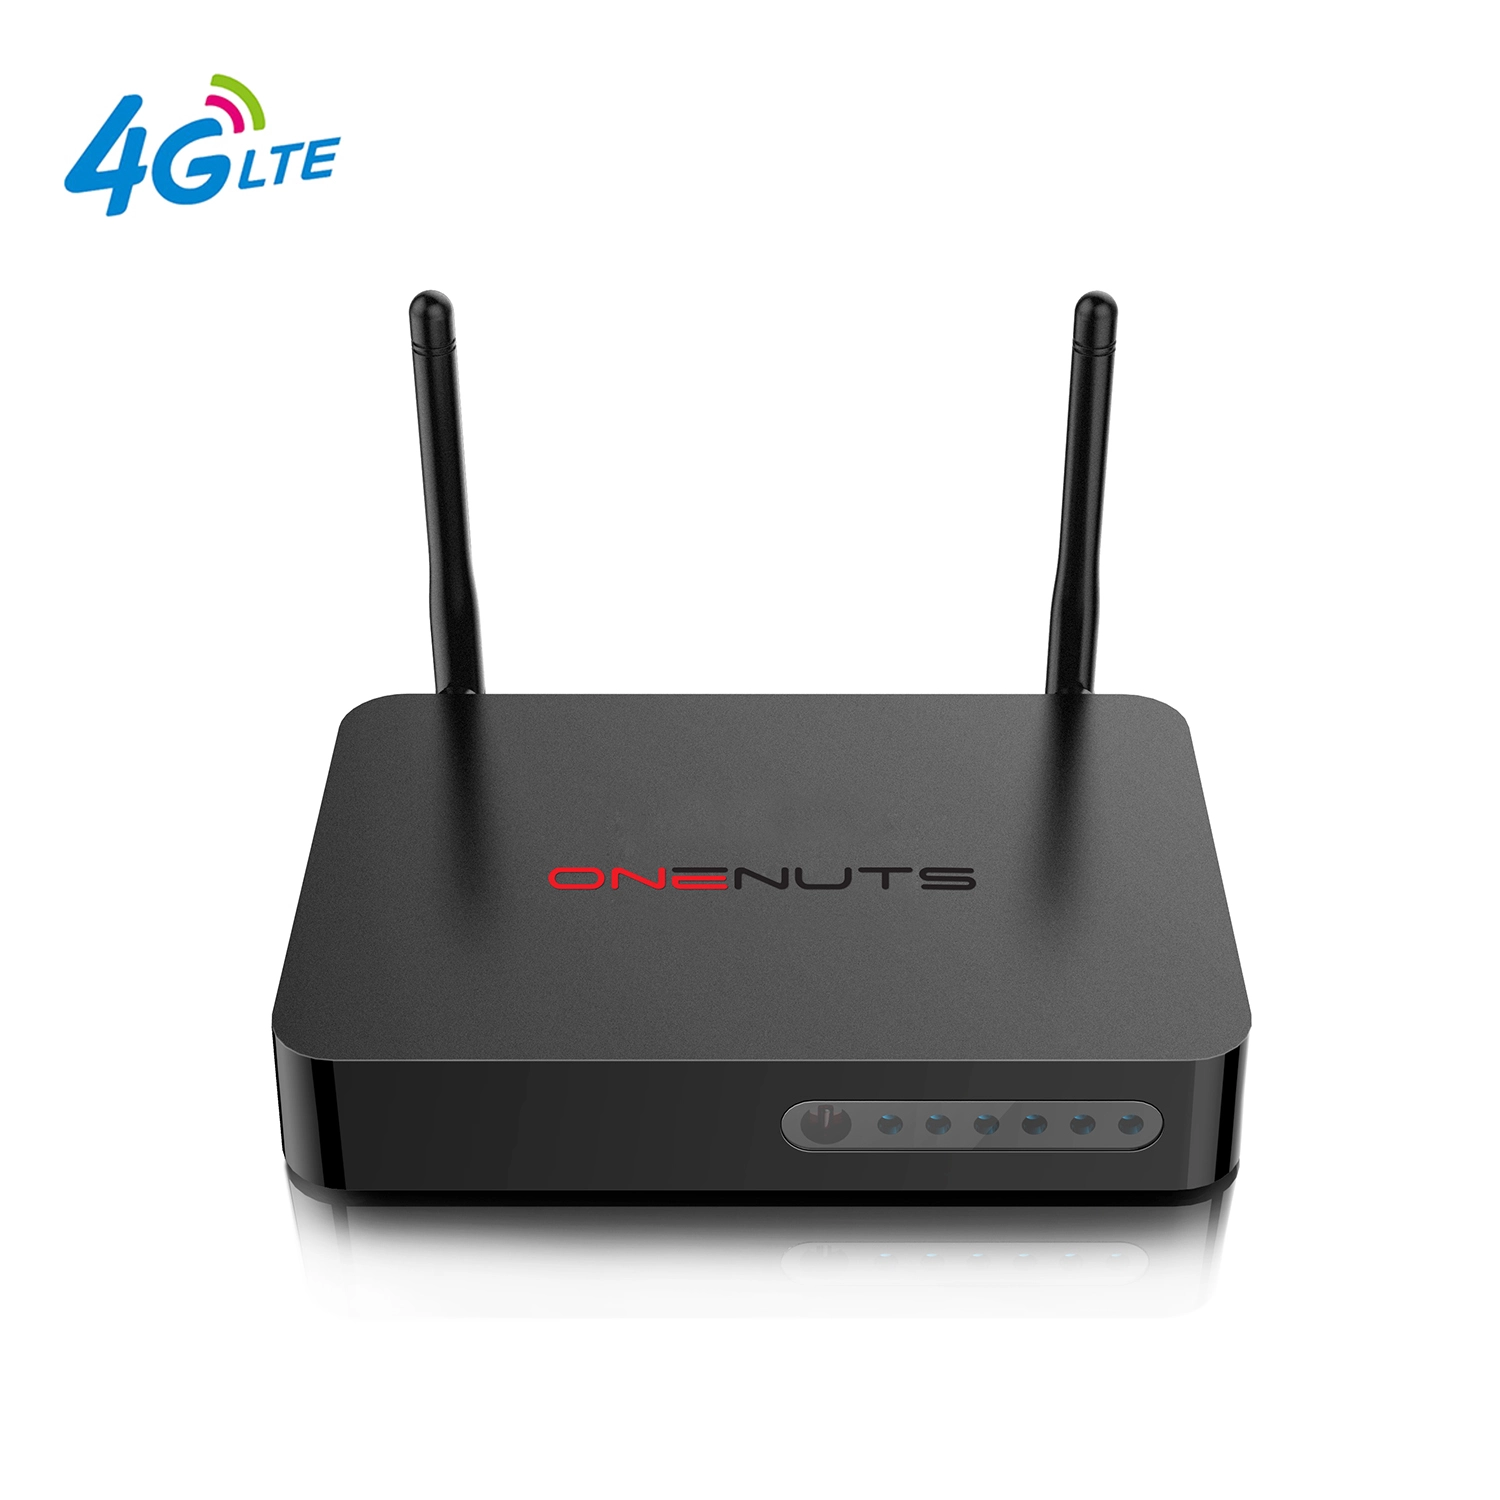 4G LTE Android TV Box